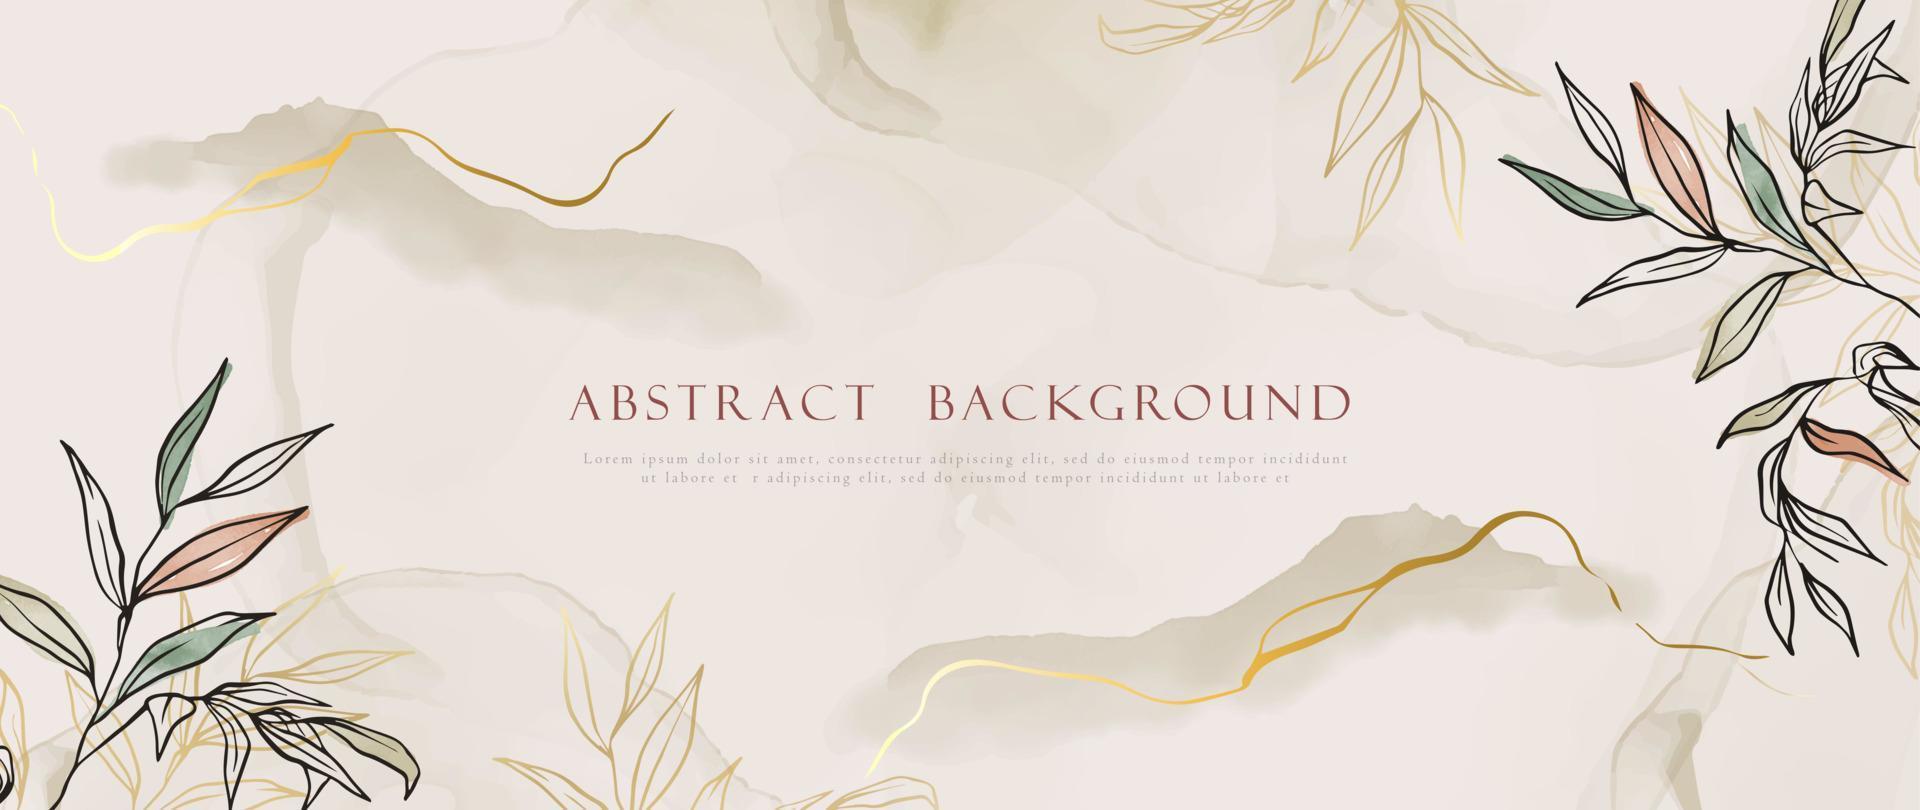 Abstract Watercolor Background for invitation, wedding, greeting and luxury design. Minimal art nature wallpaper with leaves, flowers and gold line elements vector